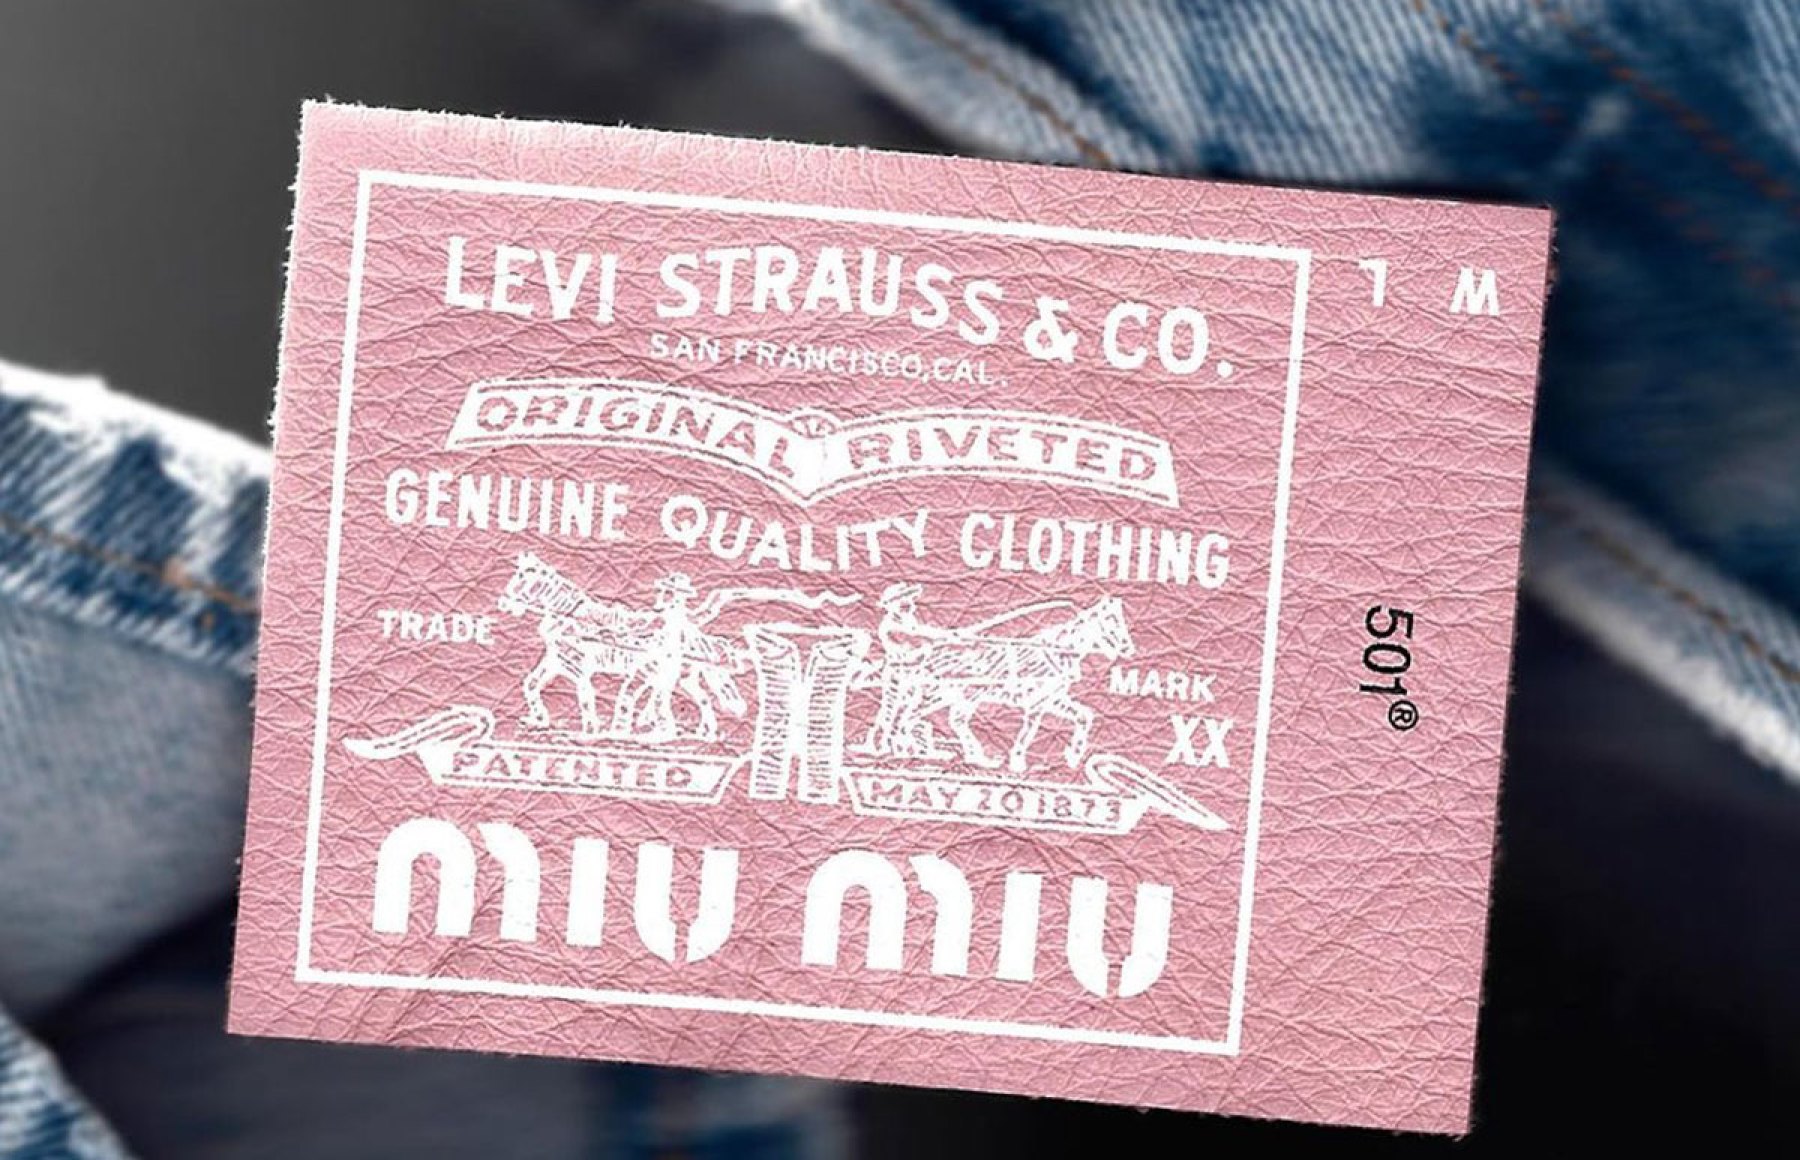 Levi's And Miu Miu Reveal Upcycled Denim Collection | Fashion News -  Conversations About HER